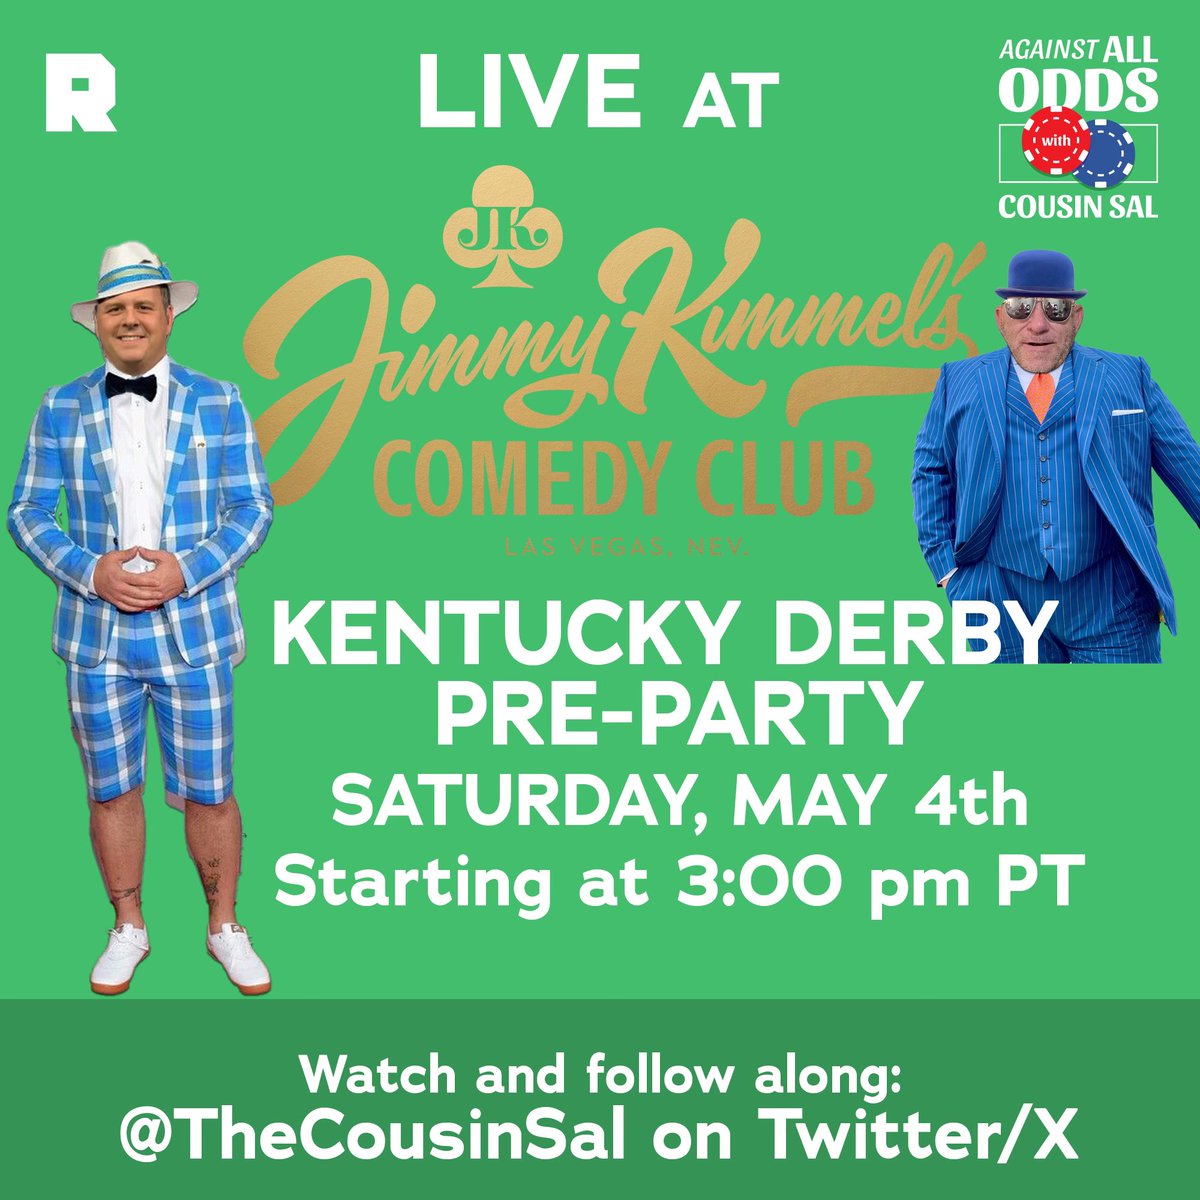 It took a lot for us to dig up @AAOHARRY’s prom picture. The least you can do is join us at @kimmelscomedy tomorrow at 3. Sliders, julips, prizes…and antics galore. #KentuckyDerby150